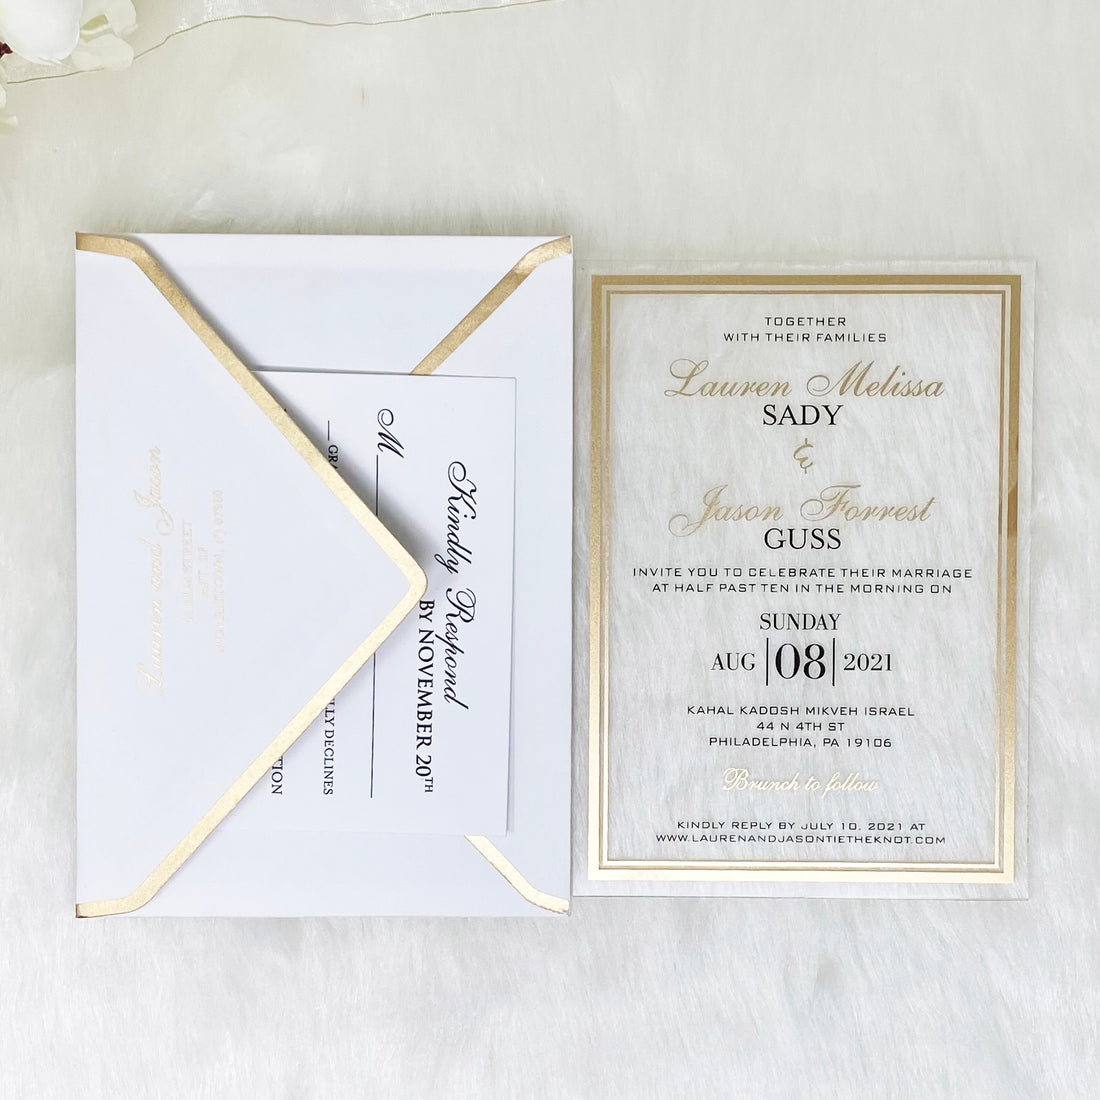 Gold & Black Clear Invitation for Wedding with Golden Borders YWI-7002